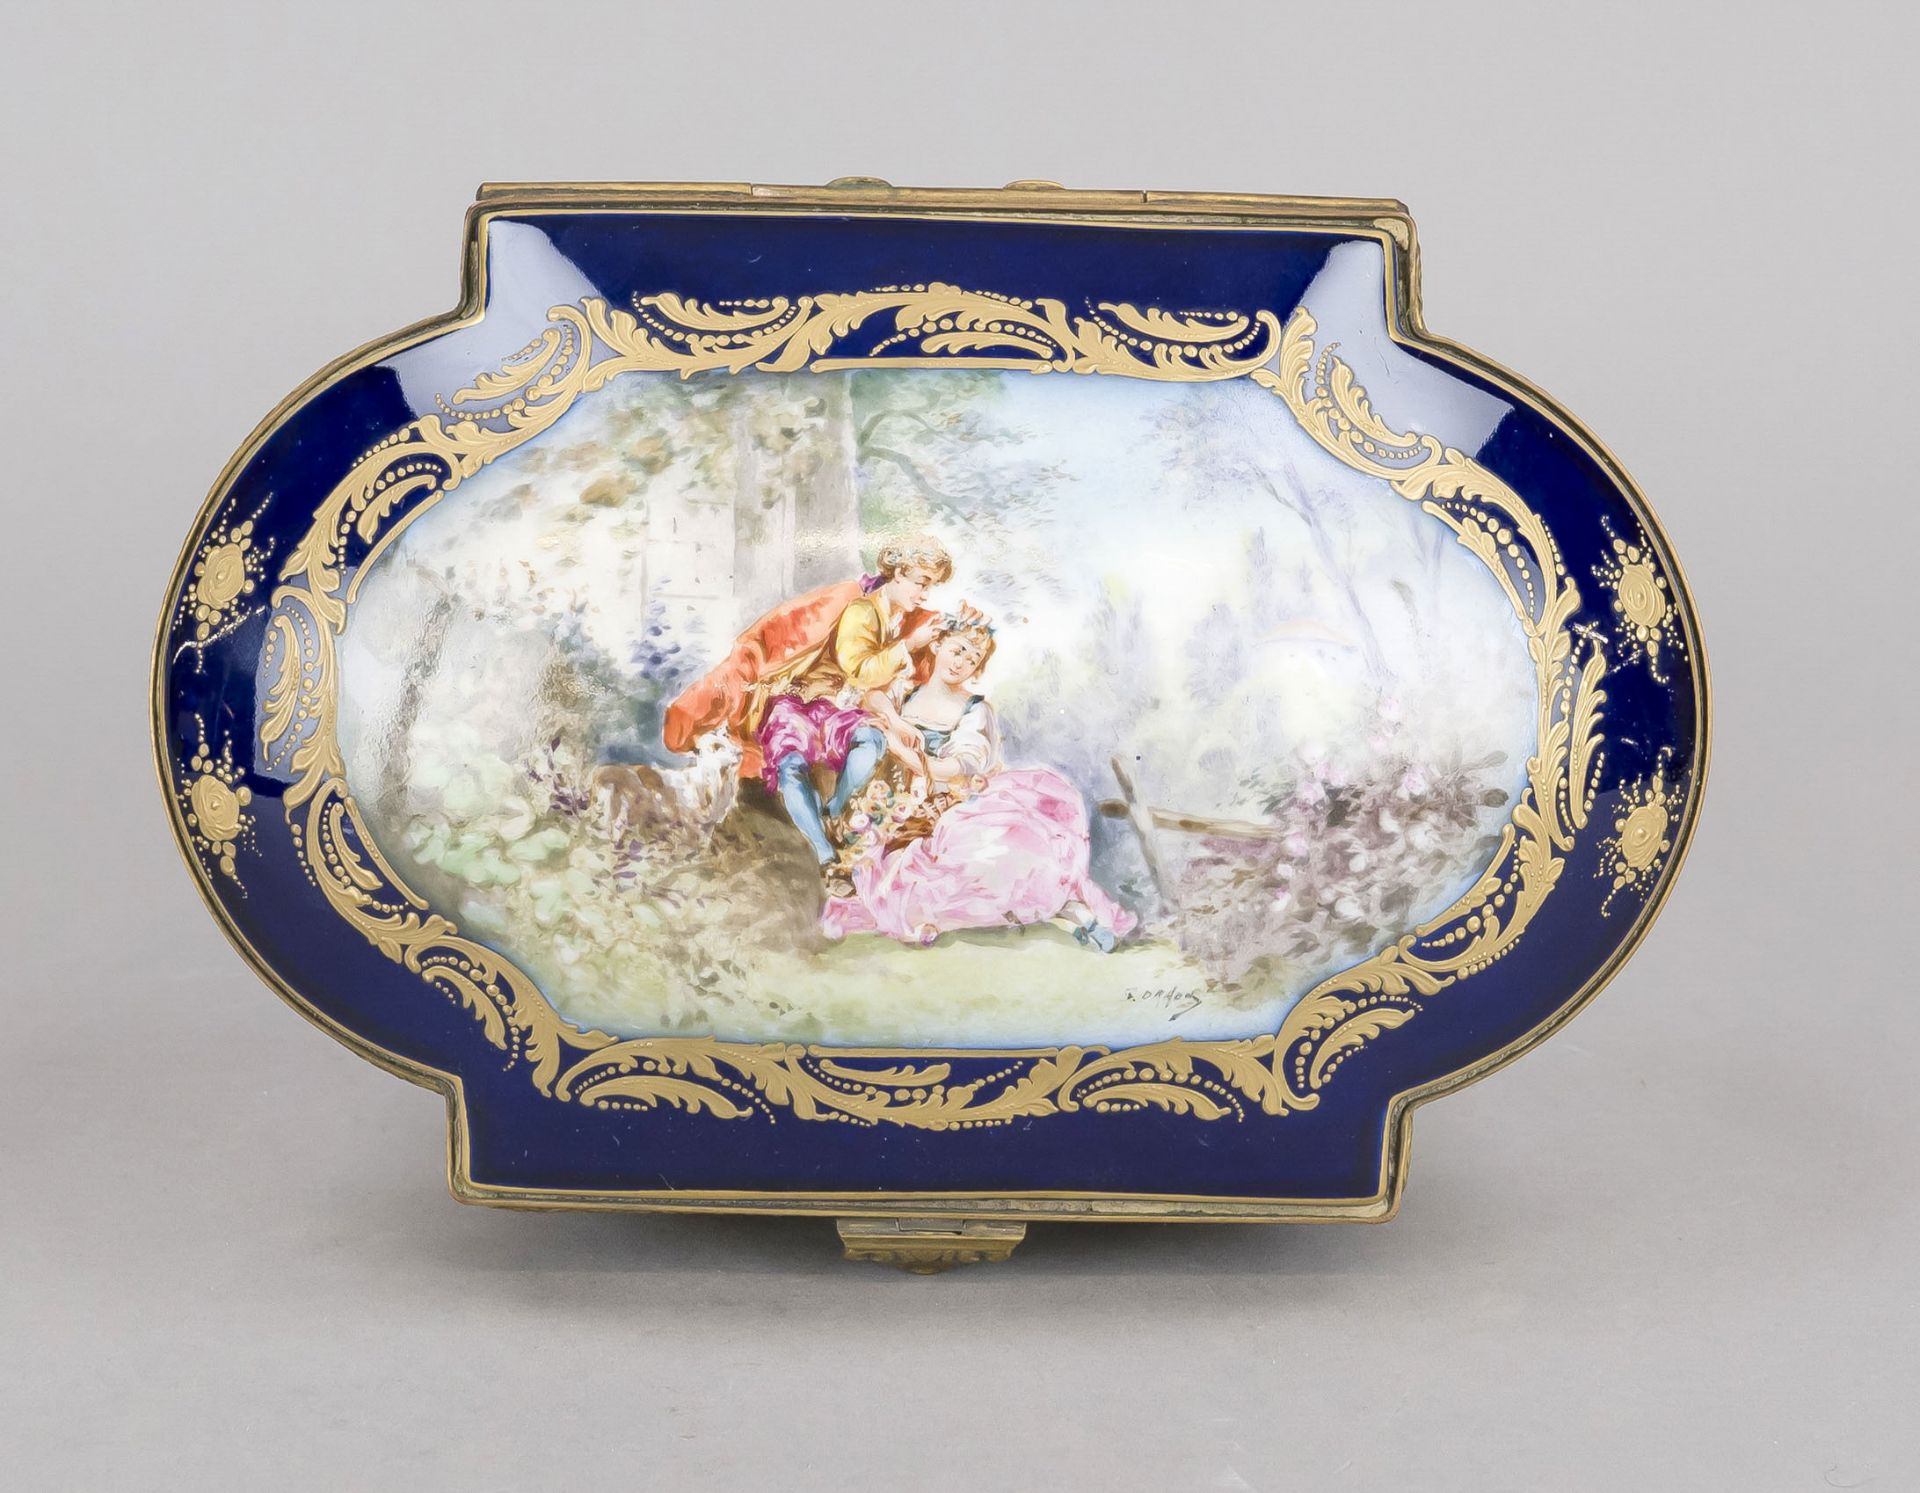 Lidded box, w. Sevres, 19th century, oval body with bulging lid, on the lid a pair of shepherds, - Image 2 of 4